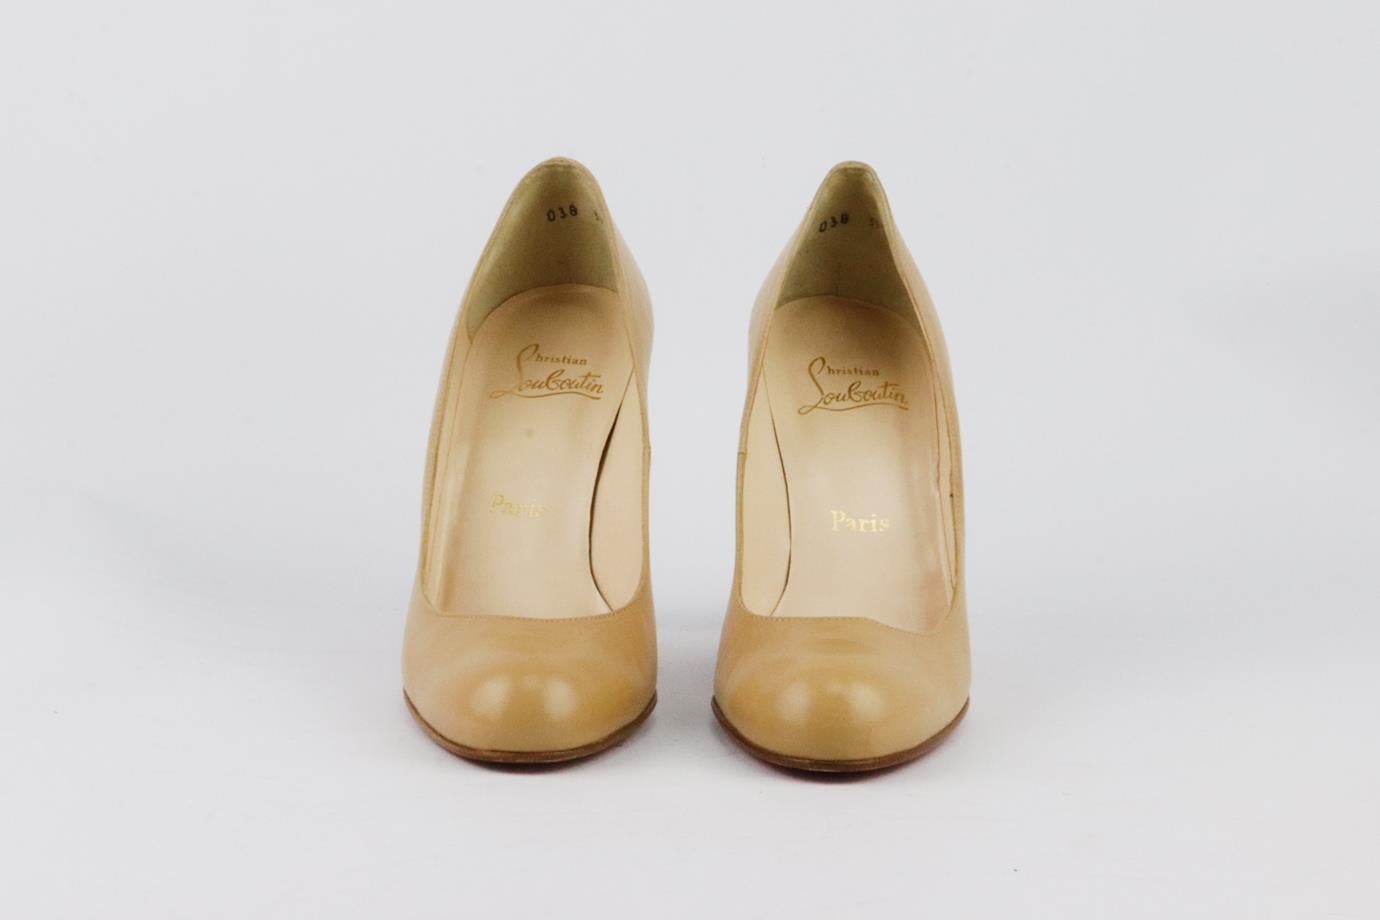 These pumps by Christian Louboutin are a classic style that will never date, made in Italy from beige leather, they have rounded toes and comfortable 89 mm heels. Heel measures approximately 89 mm/ 3.5 inches. Beige leather. Slips on. Does not come